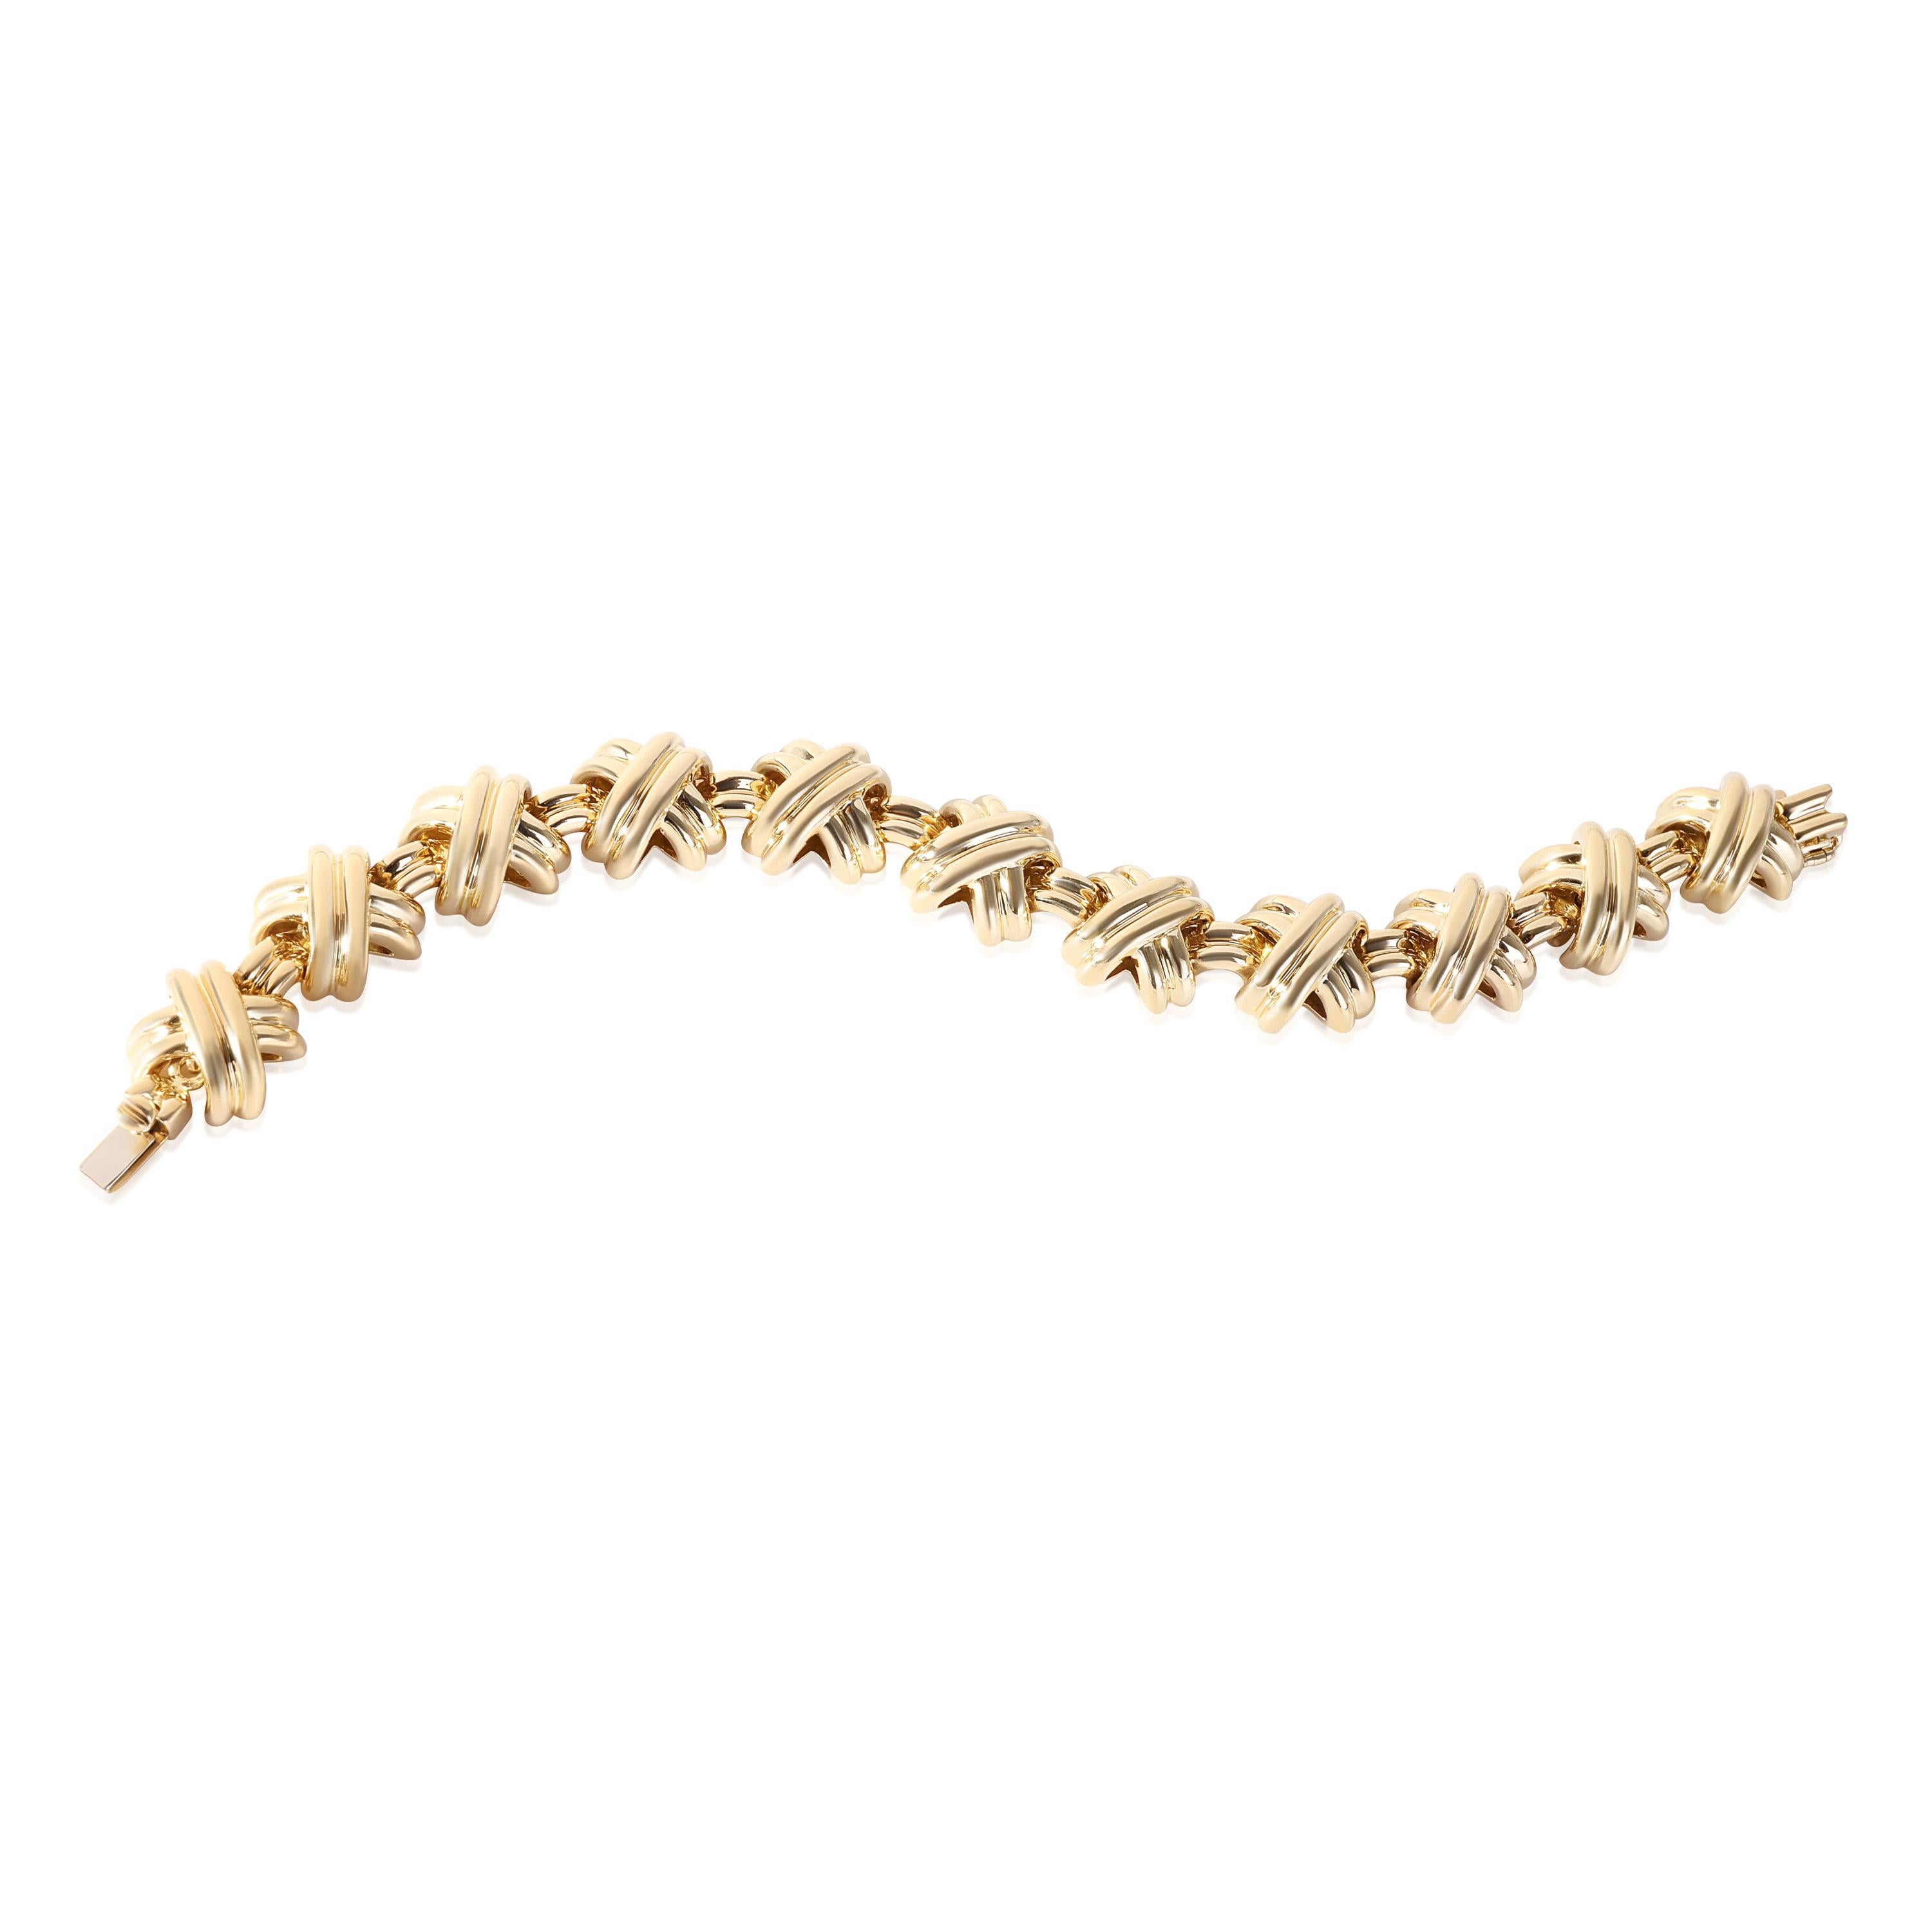 Tiffany & Co. Vintage X Bracelet in 18k Yellow Gold

PRIMARY DETAILS
SKU: 119153
Listing Title: Tiffany & Co. Vintage X Bracelet in 18k Yellow Gold
Condition Description: Retails for 15,000 USD. In excellent condition and recently polished. 7.25